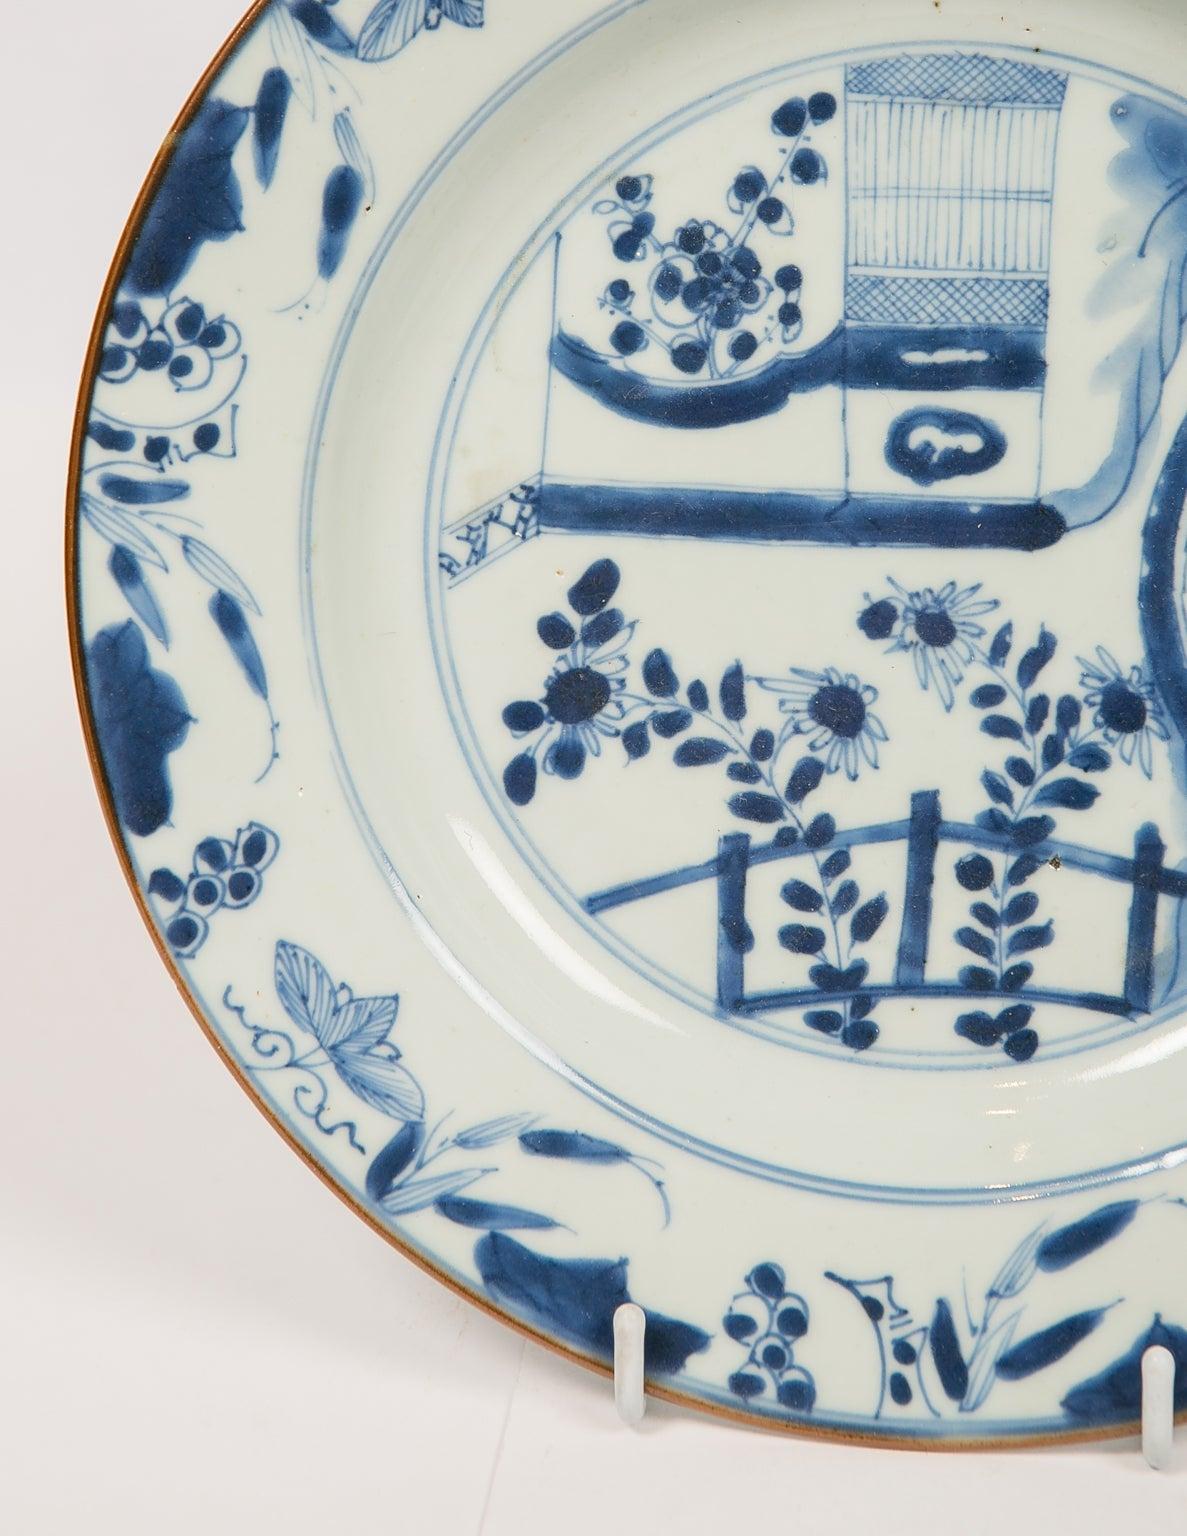 Porcelain Eight Antique Blue and White Chinese Dishes Made in the 18th Century circa 1770